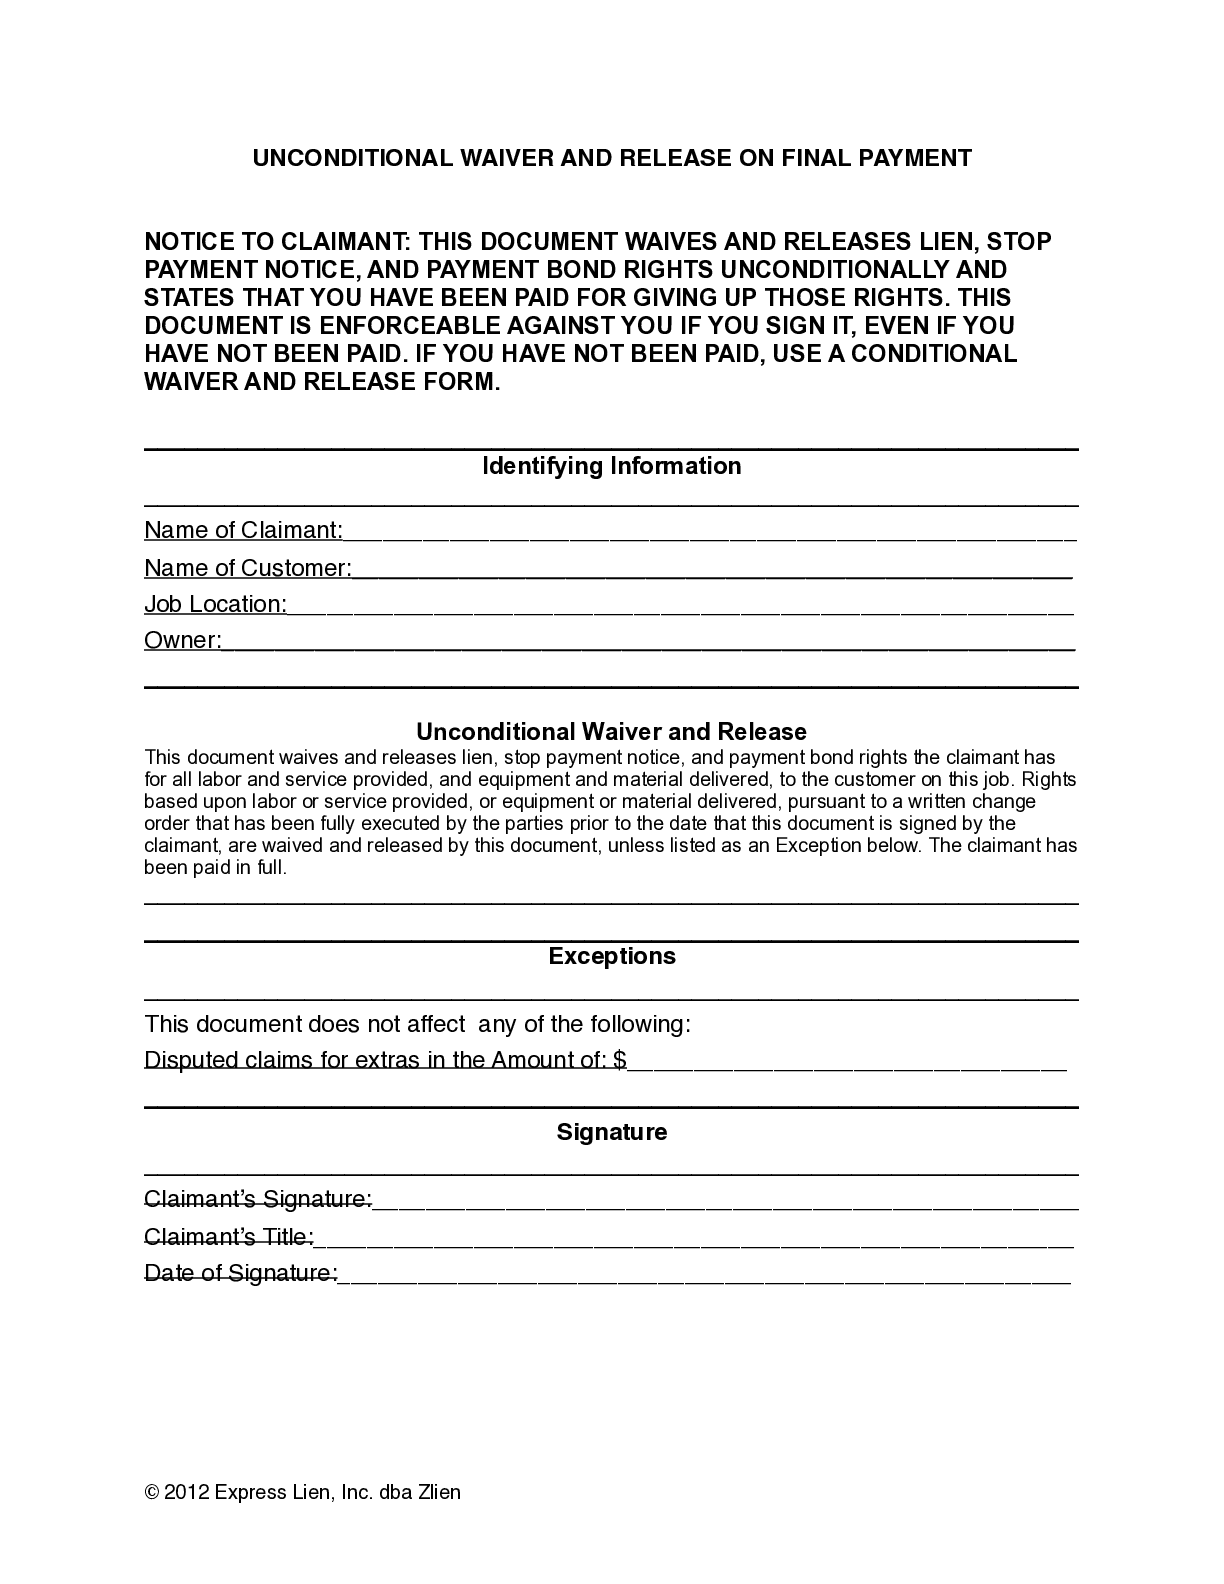 Pennsylvania Final Unconditional Lien Waiver Form - free from